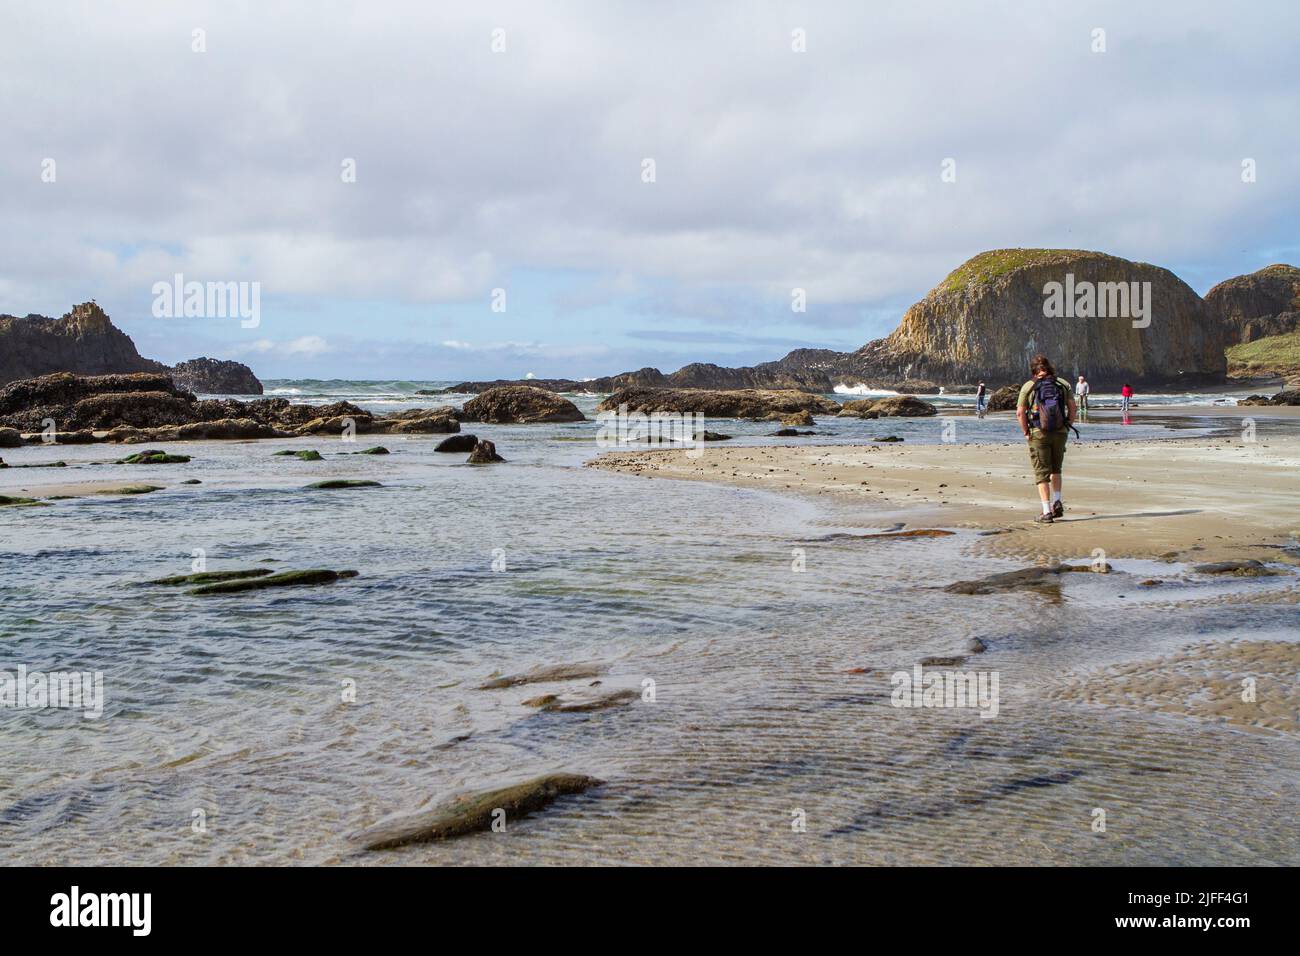 Several tourists, including a man with a daypack, walk along the beach at Seal Rock State Recreation Site on the central coast of Oregon, USA. Stock Photo